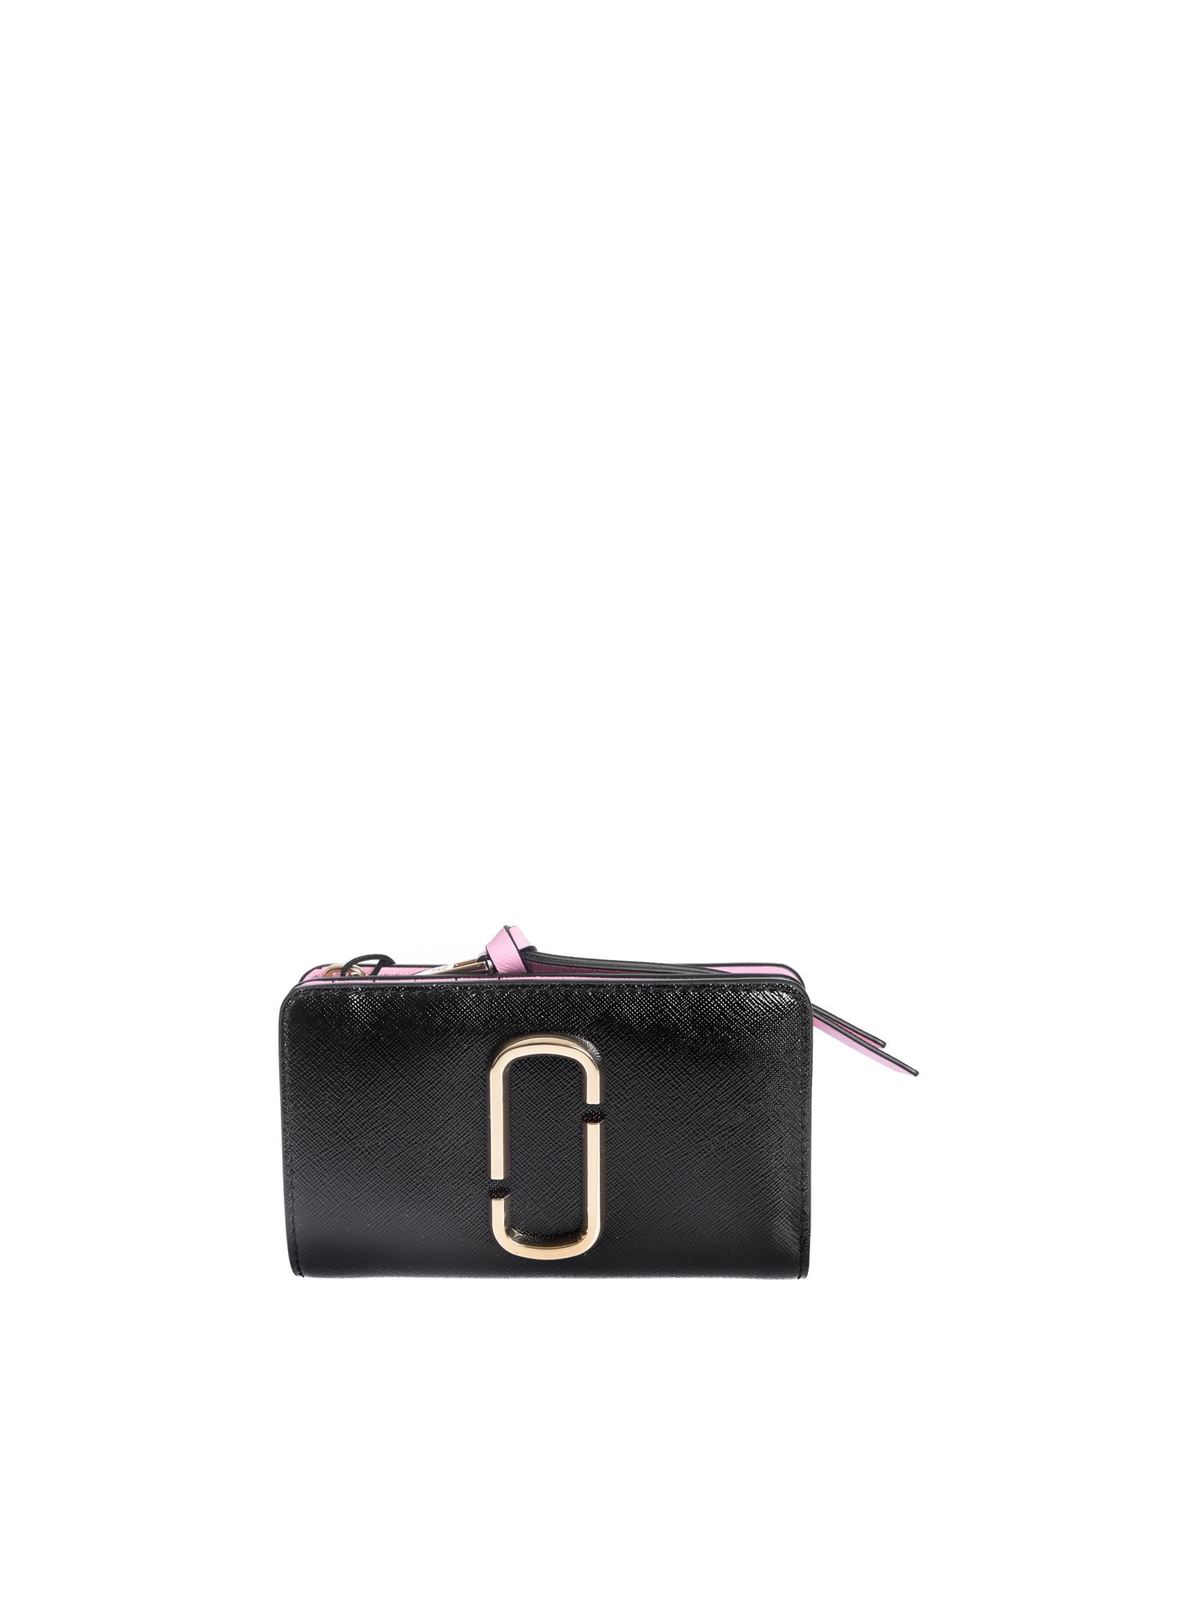 Wallets & purses Marc Jacobs - Snapshot black and pink wallet